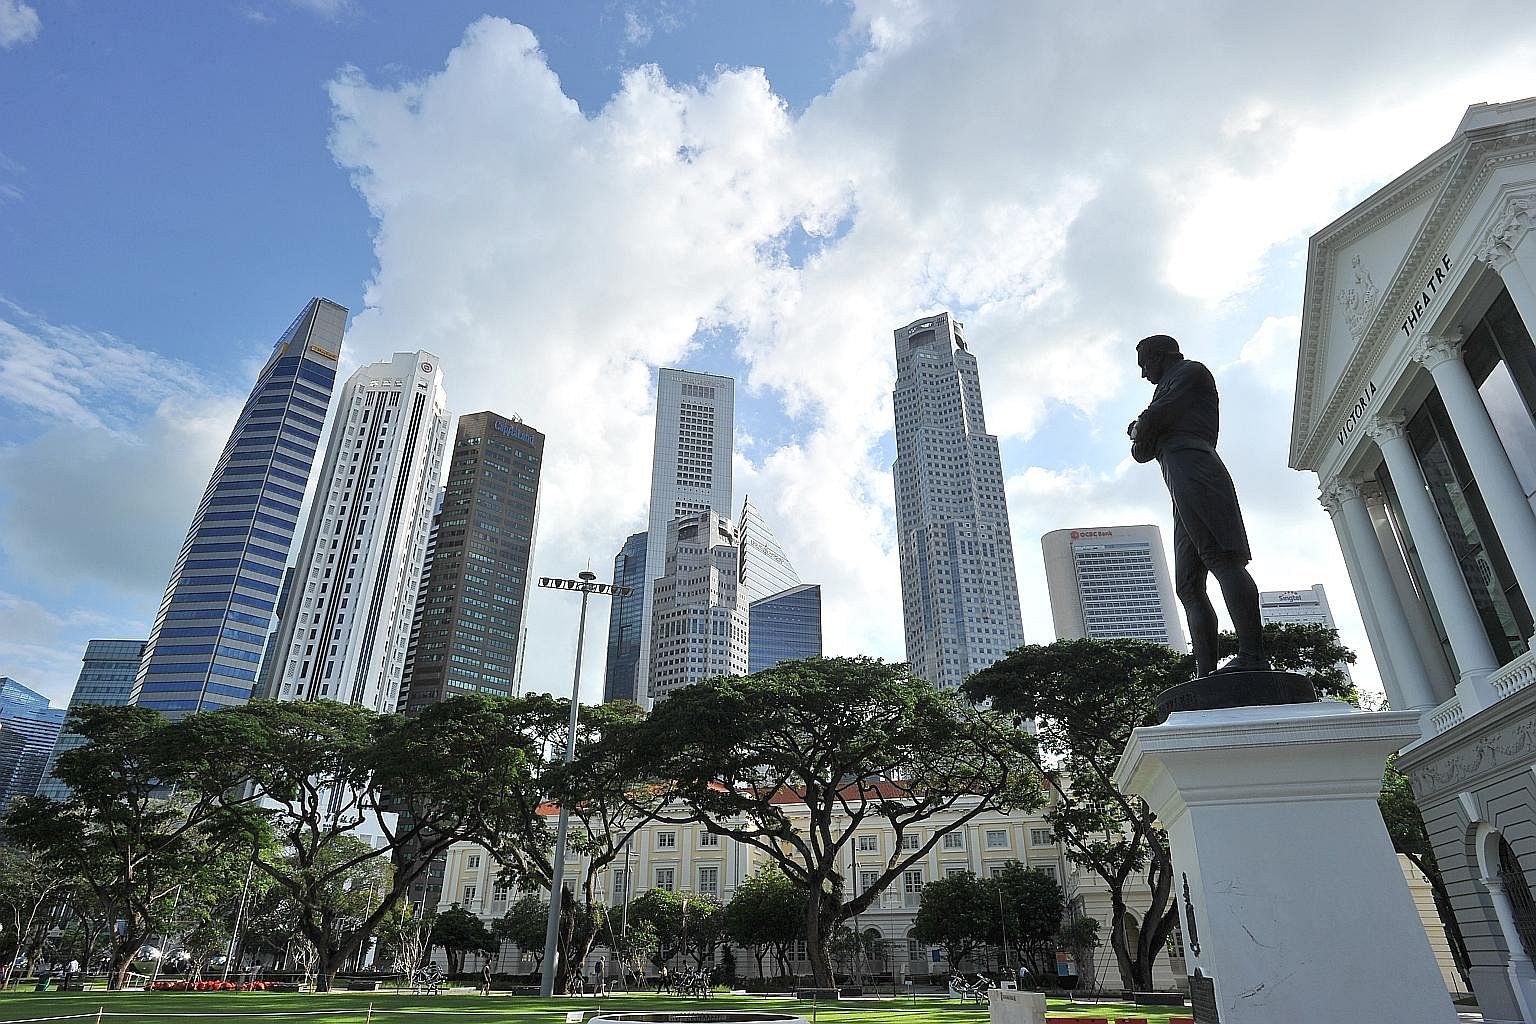 Stamford Raffles' statue outside Victoria Theatre & Victoria Concert Hall is a reminder of how his vision helped transform Singapore over 200 years. Singaporeans must now forge a new, equally ambitious vision for the next 200..